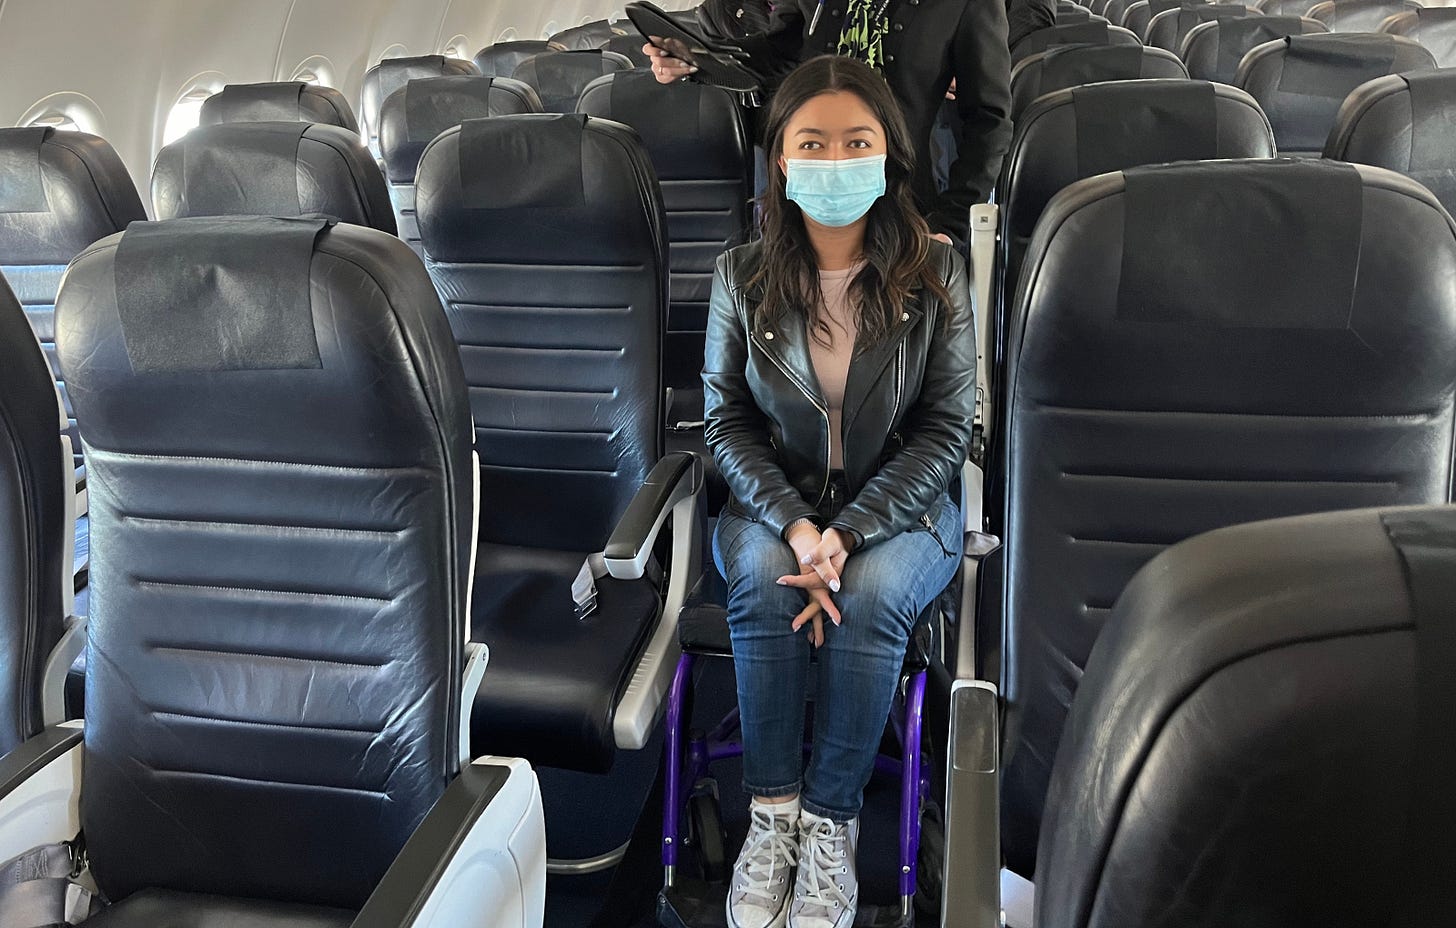 Olivia, wearing a black jacket and face mask, sits in an aisle chair in the middle of an aeroplane. she is surrounded on either side by rows of empty seats.